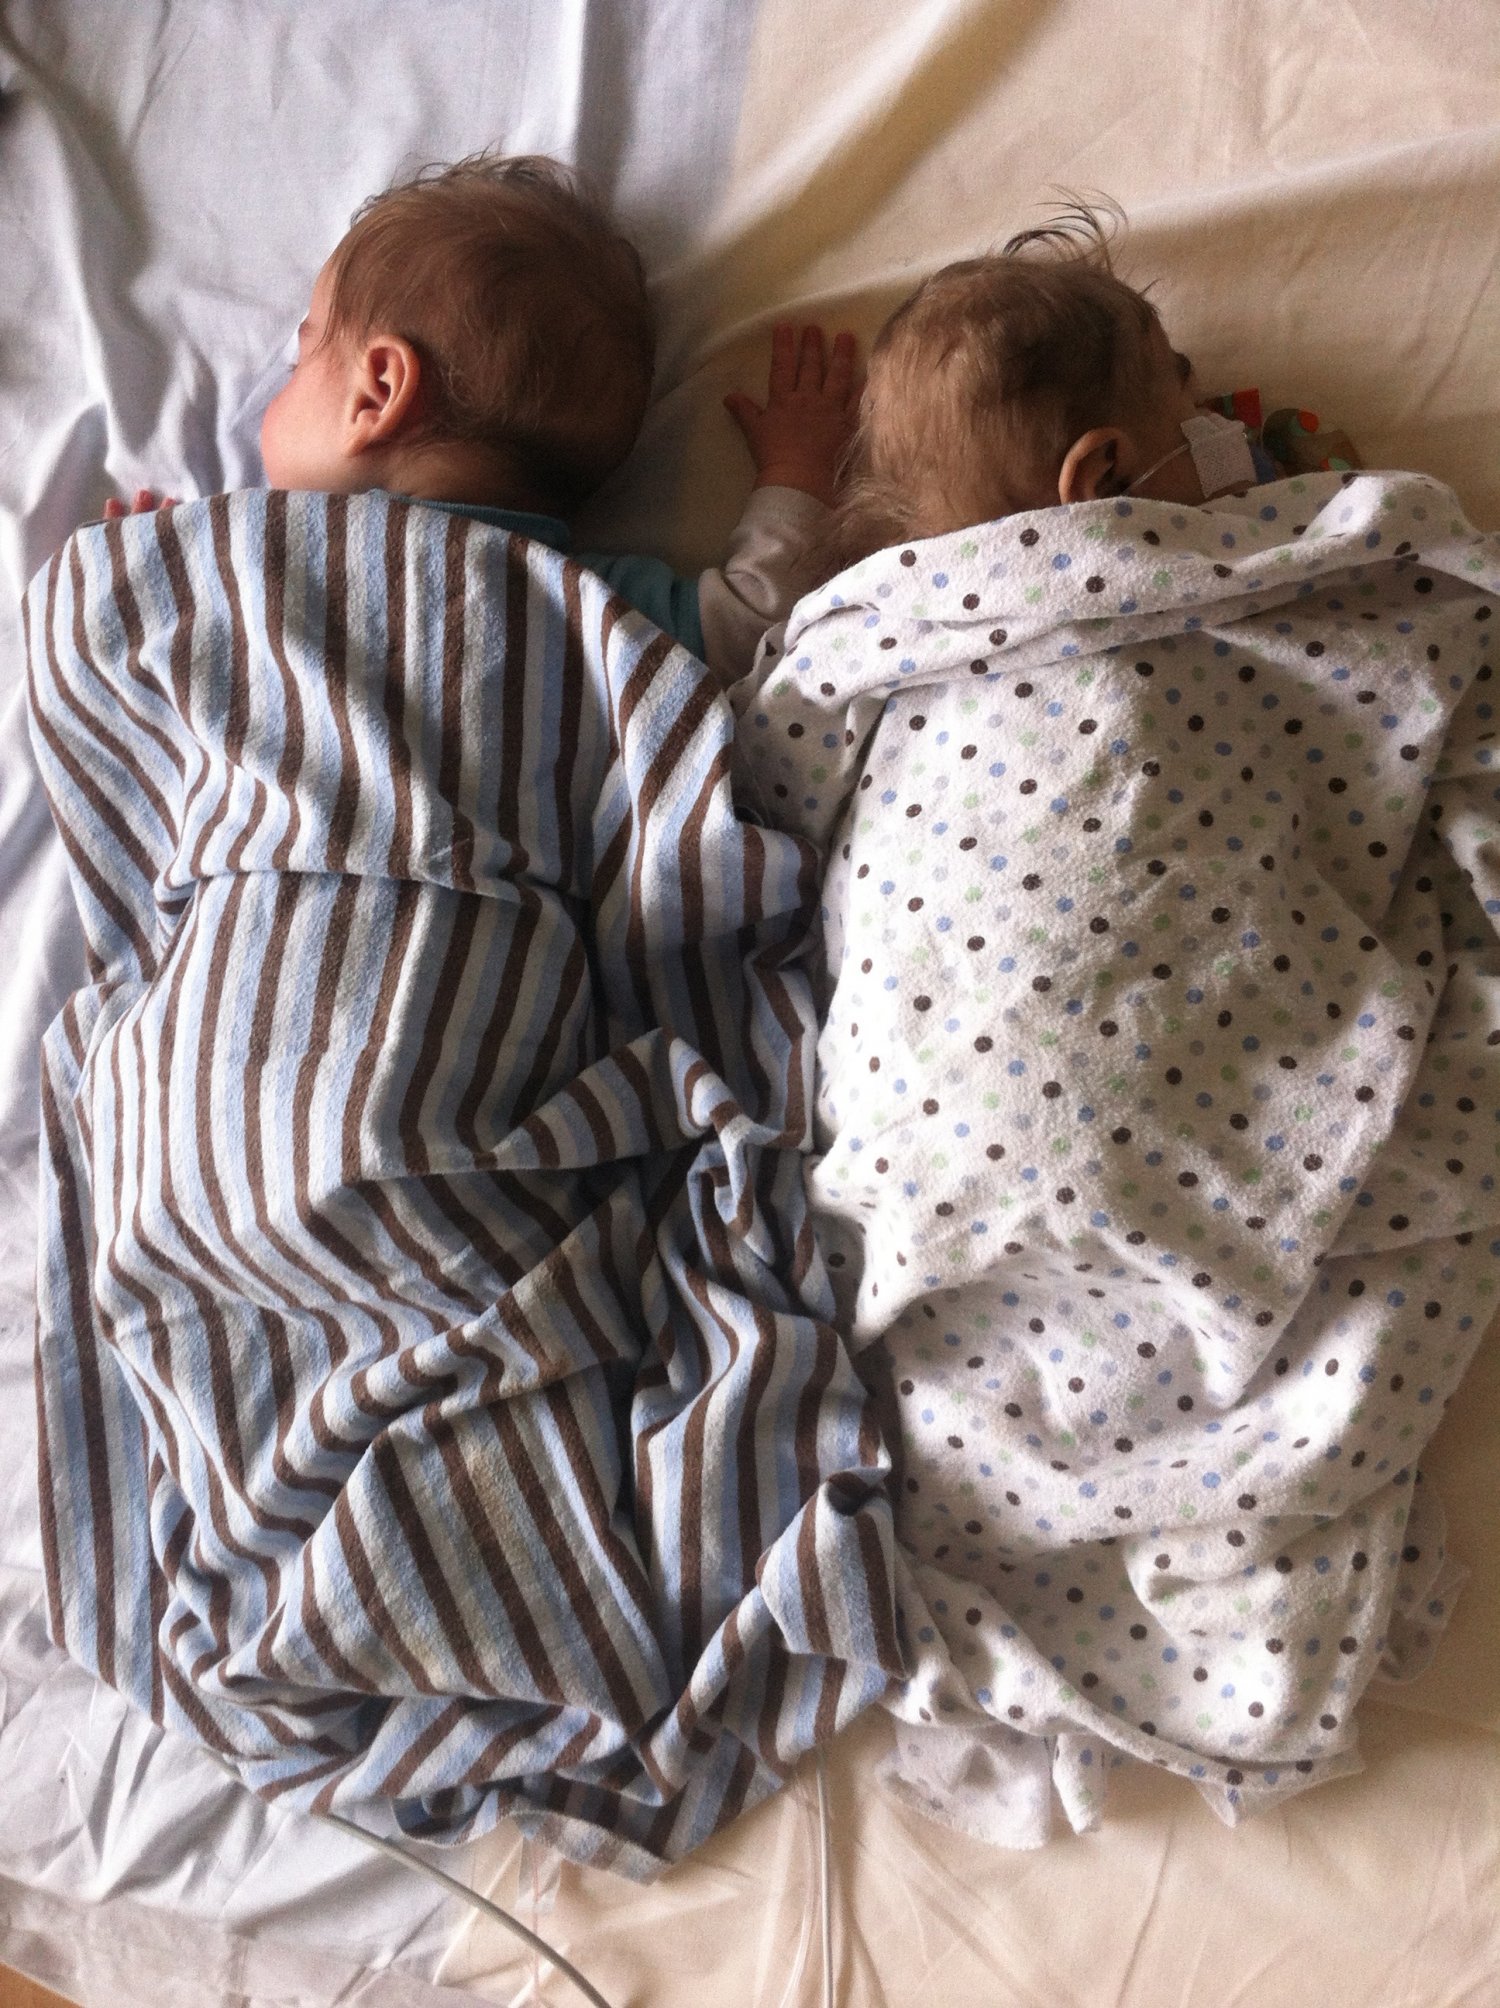 Twin infants, one much smaller than the other